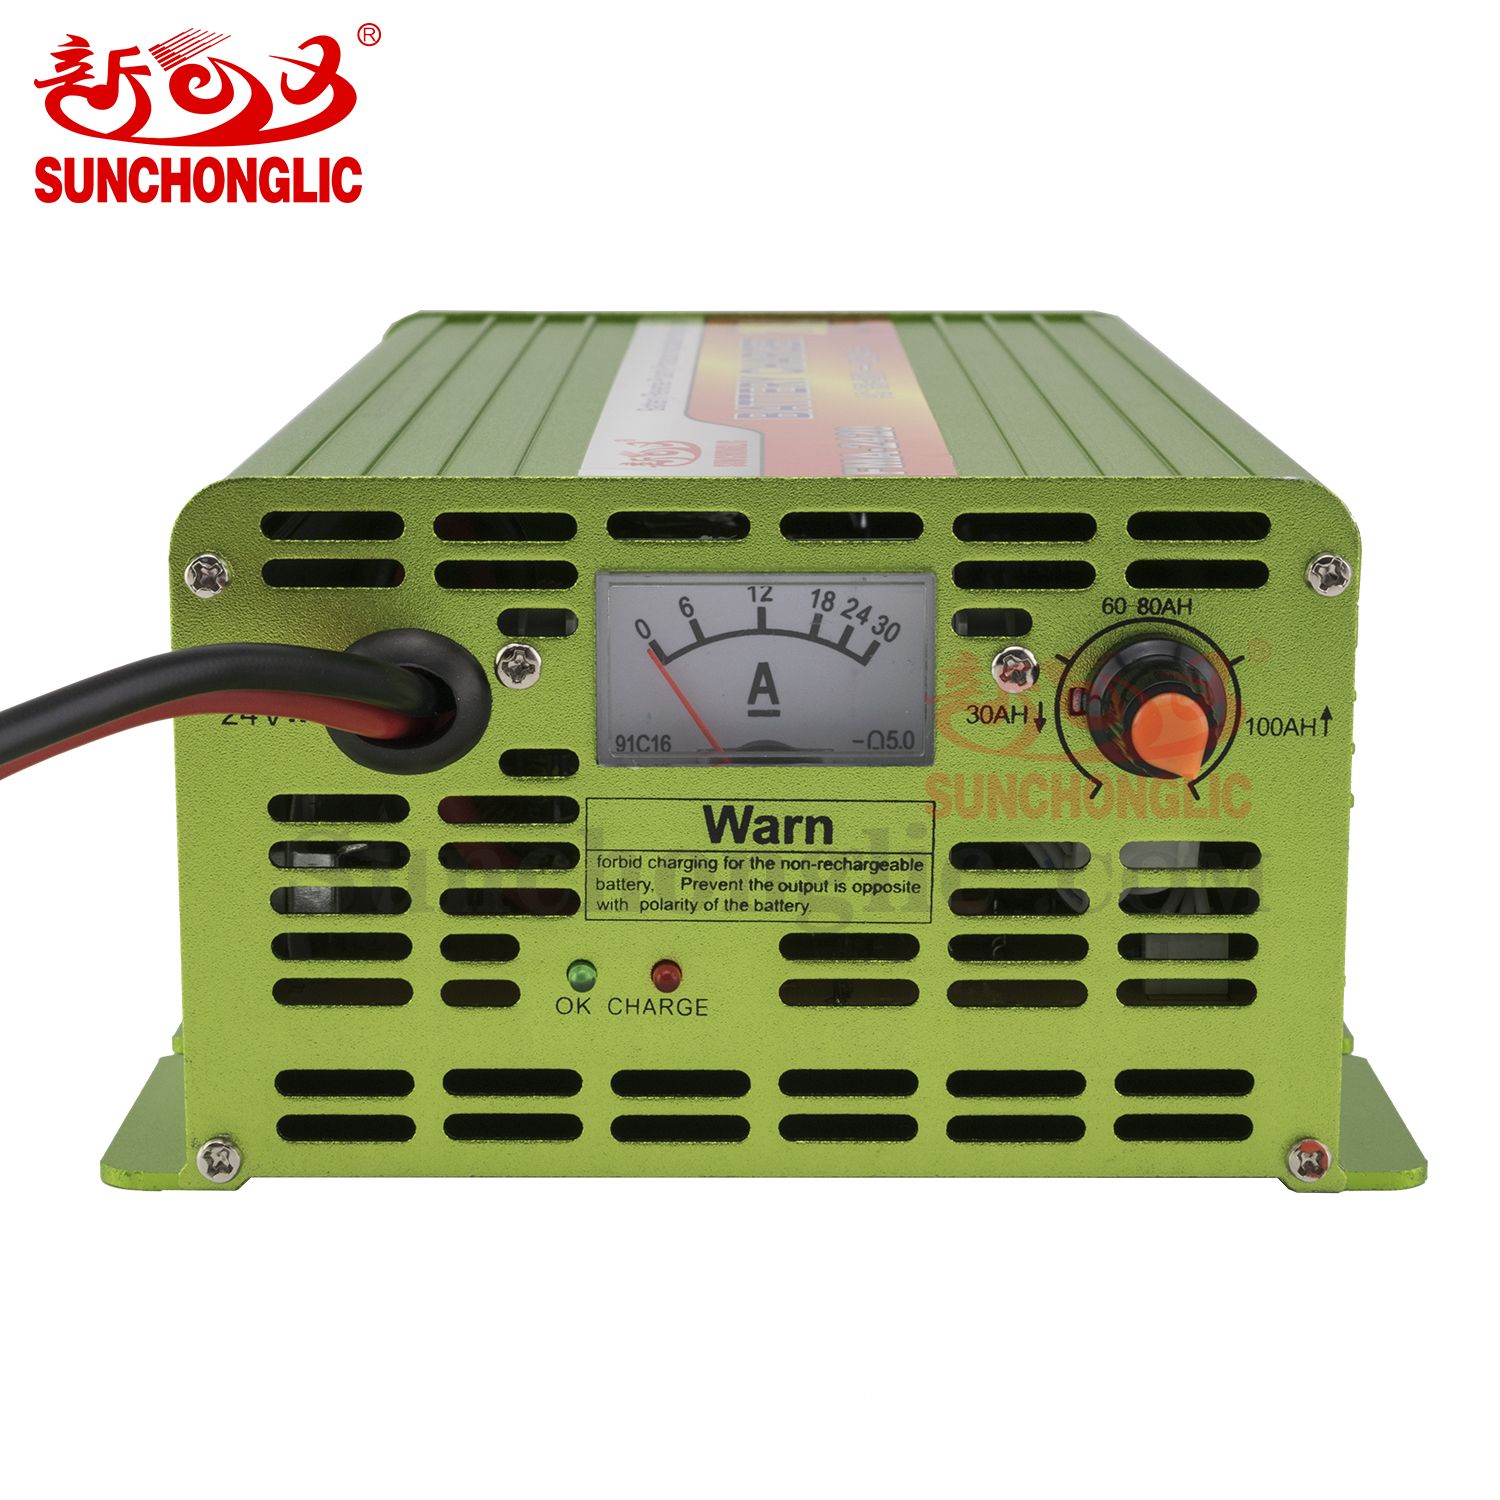 AGM/GEL Battery Charger - FMA-2420